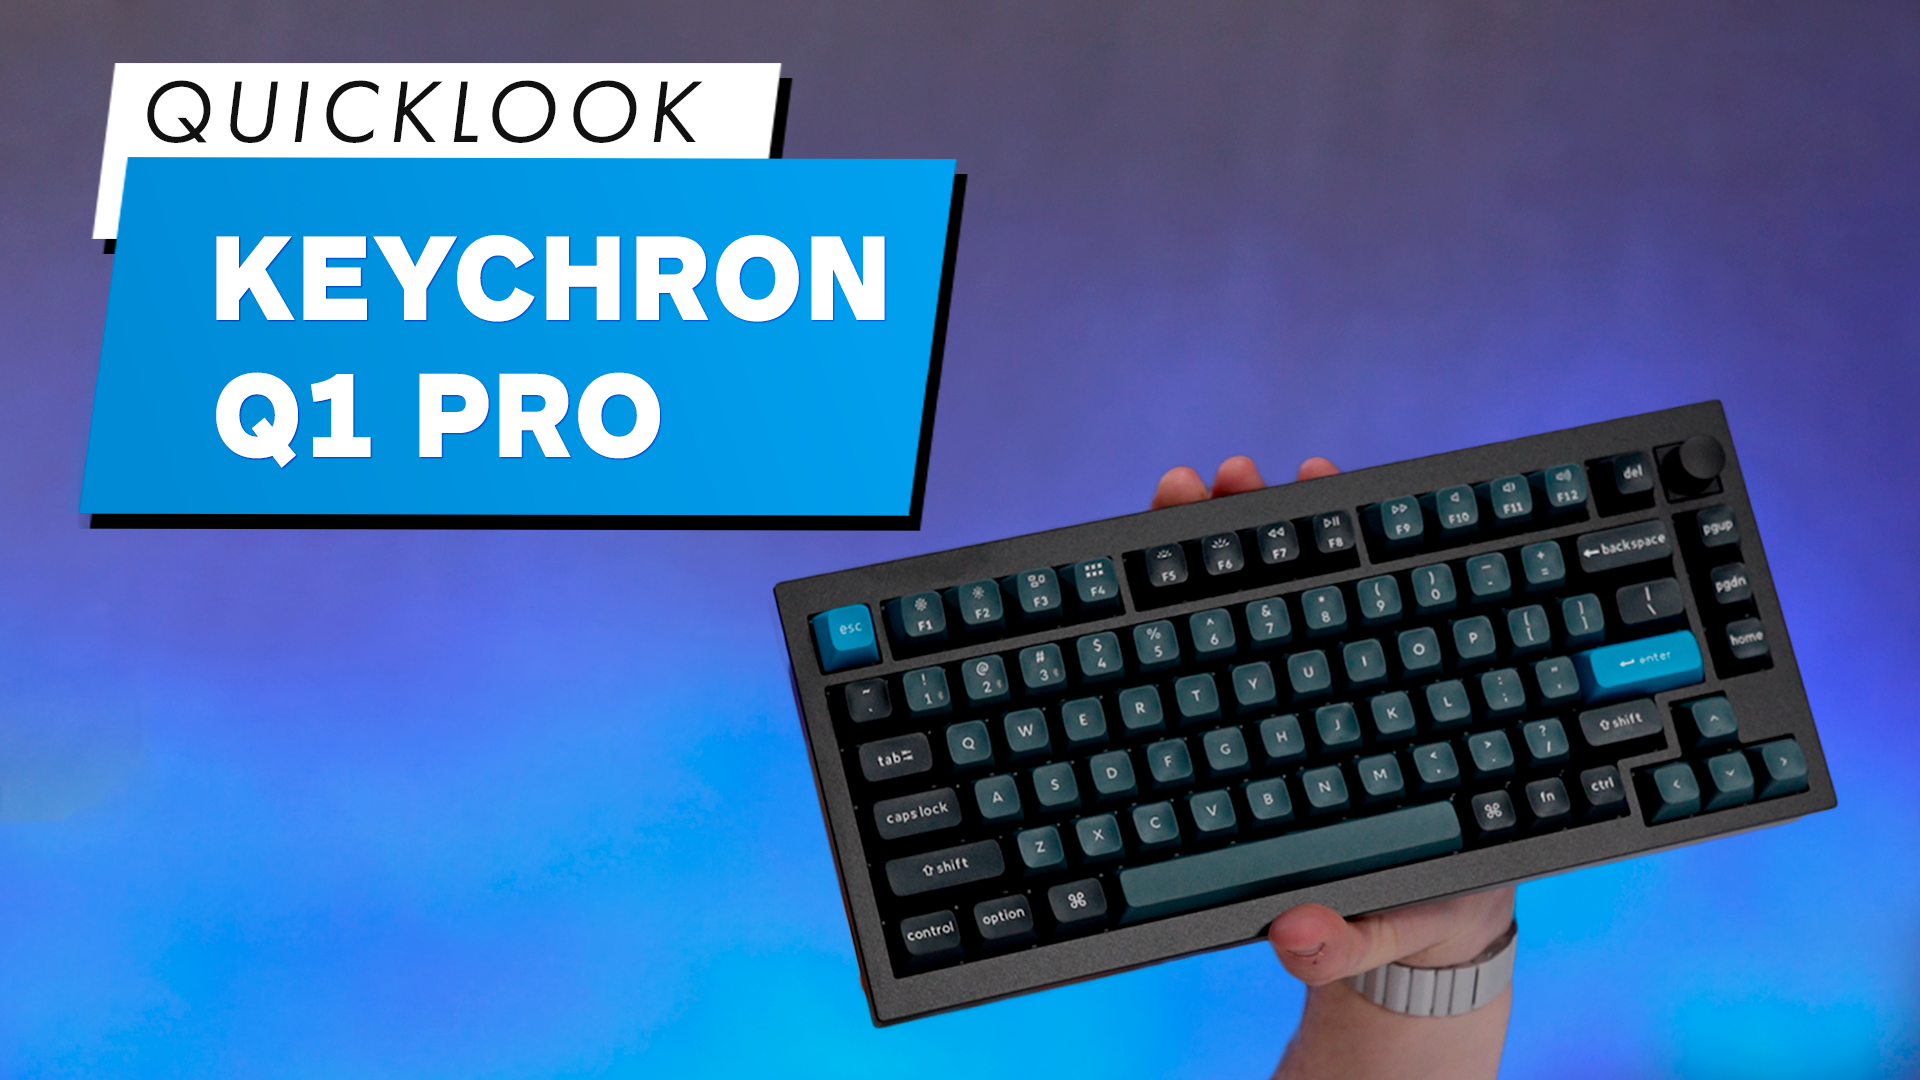 Discover the new Keychron Q1 Pro